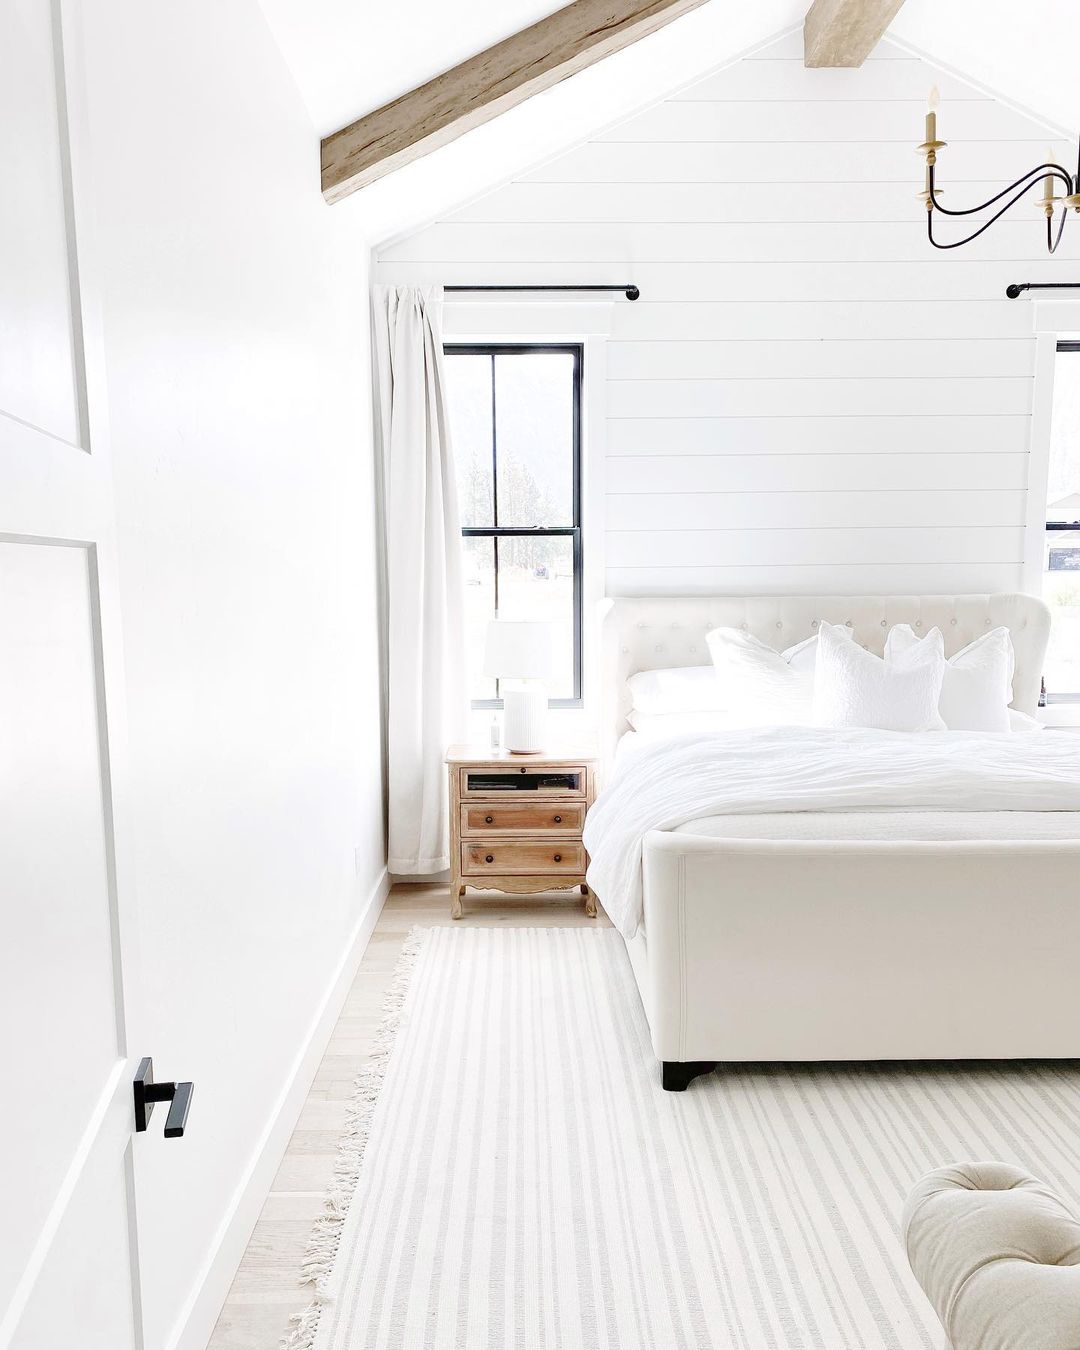 Farmhouse Style Bedroom with White, Shiplap Wall. Photo by Instagram user @our_sweet_haven